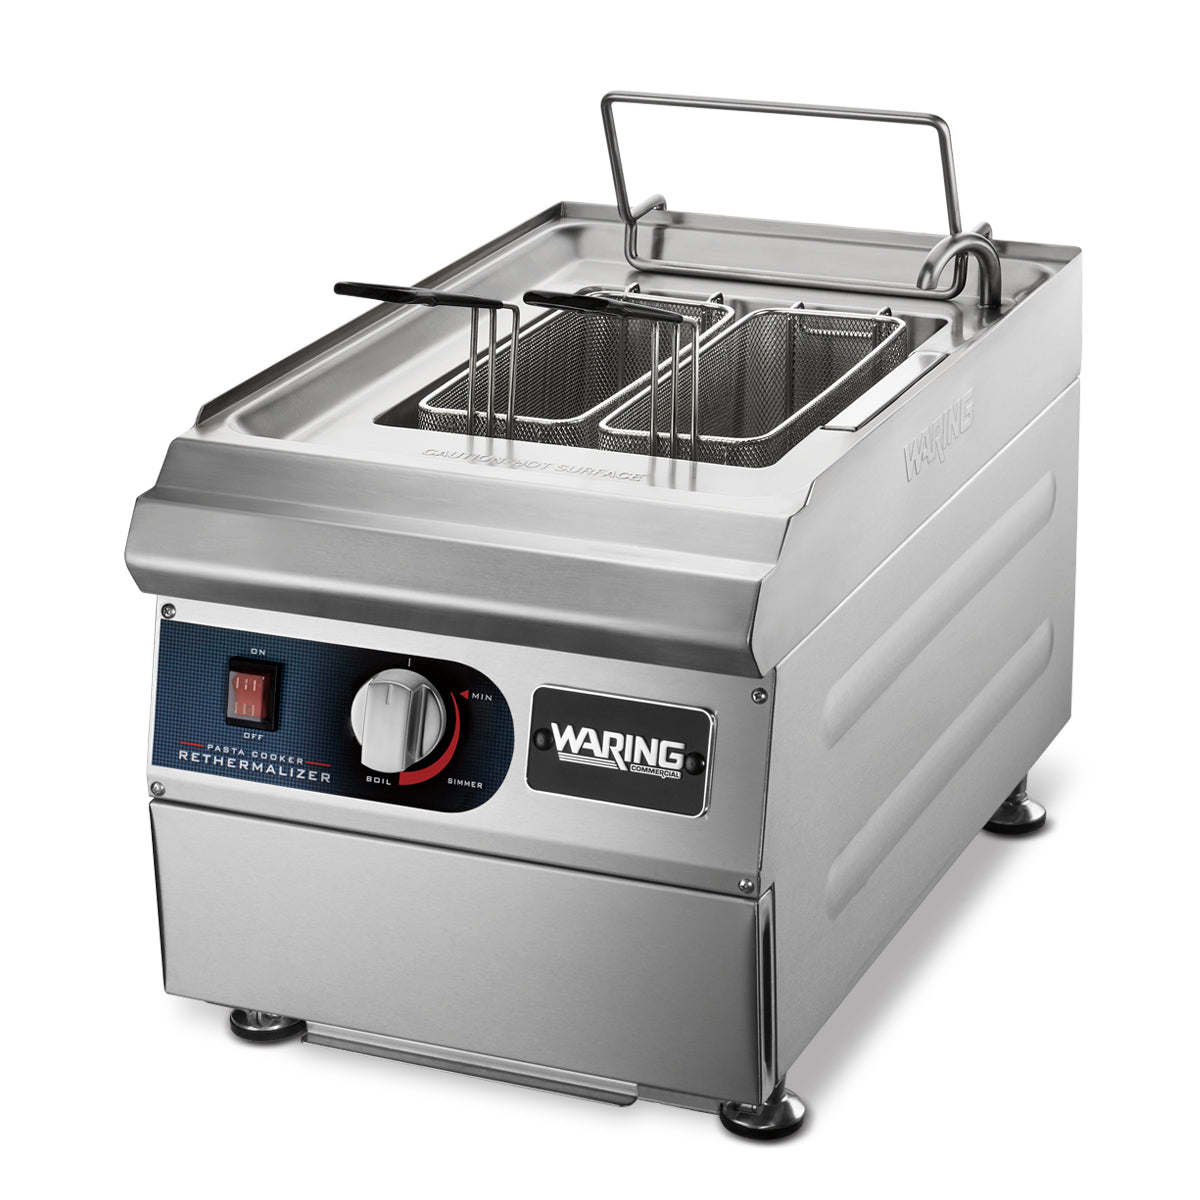 WPC100 Commercial Pasta Cooker by Waring Commercial